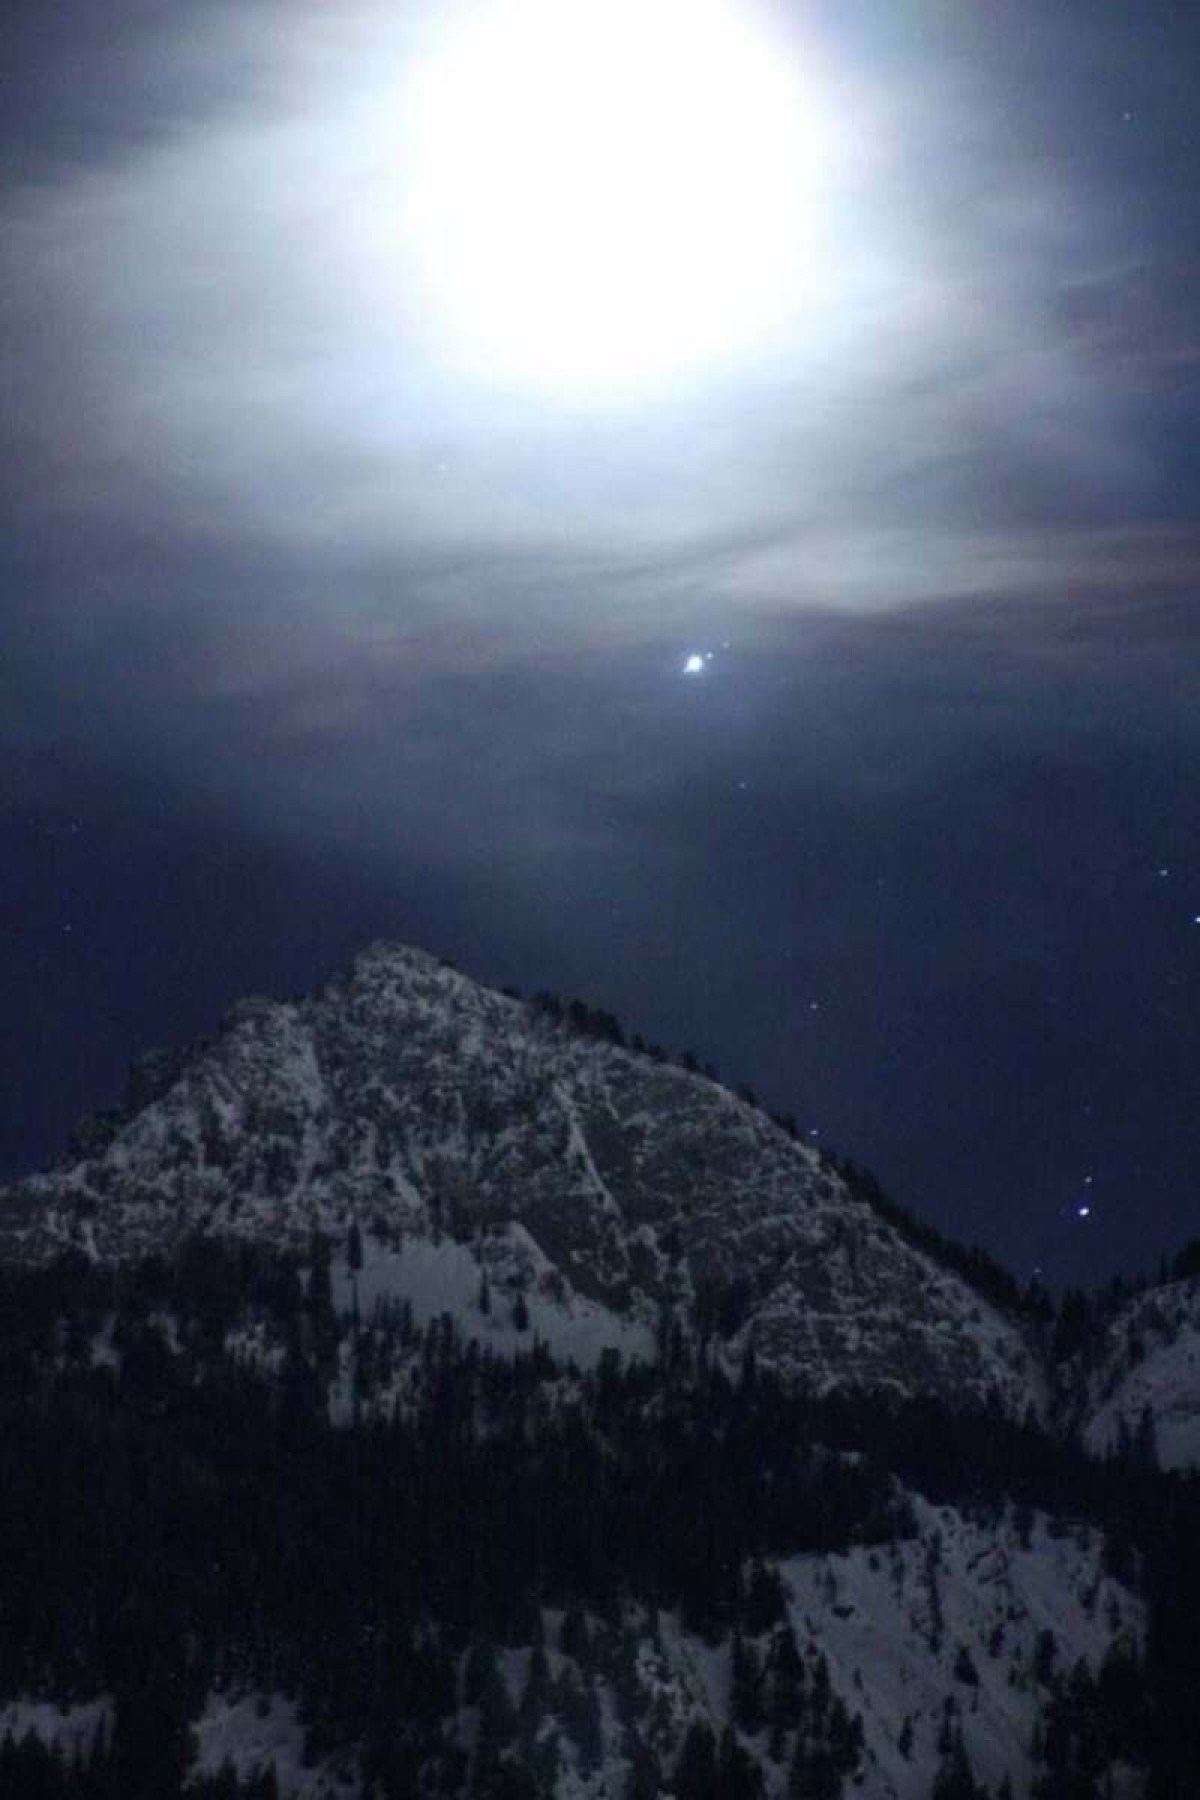 Jupiter and its three largest moons are visible as the moon rises over the Wasatch Mountains near Salt Lake City on February 27, 2019.  Astronomers should get a similar view of Jupiter during opposition on Monday (9/26)